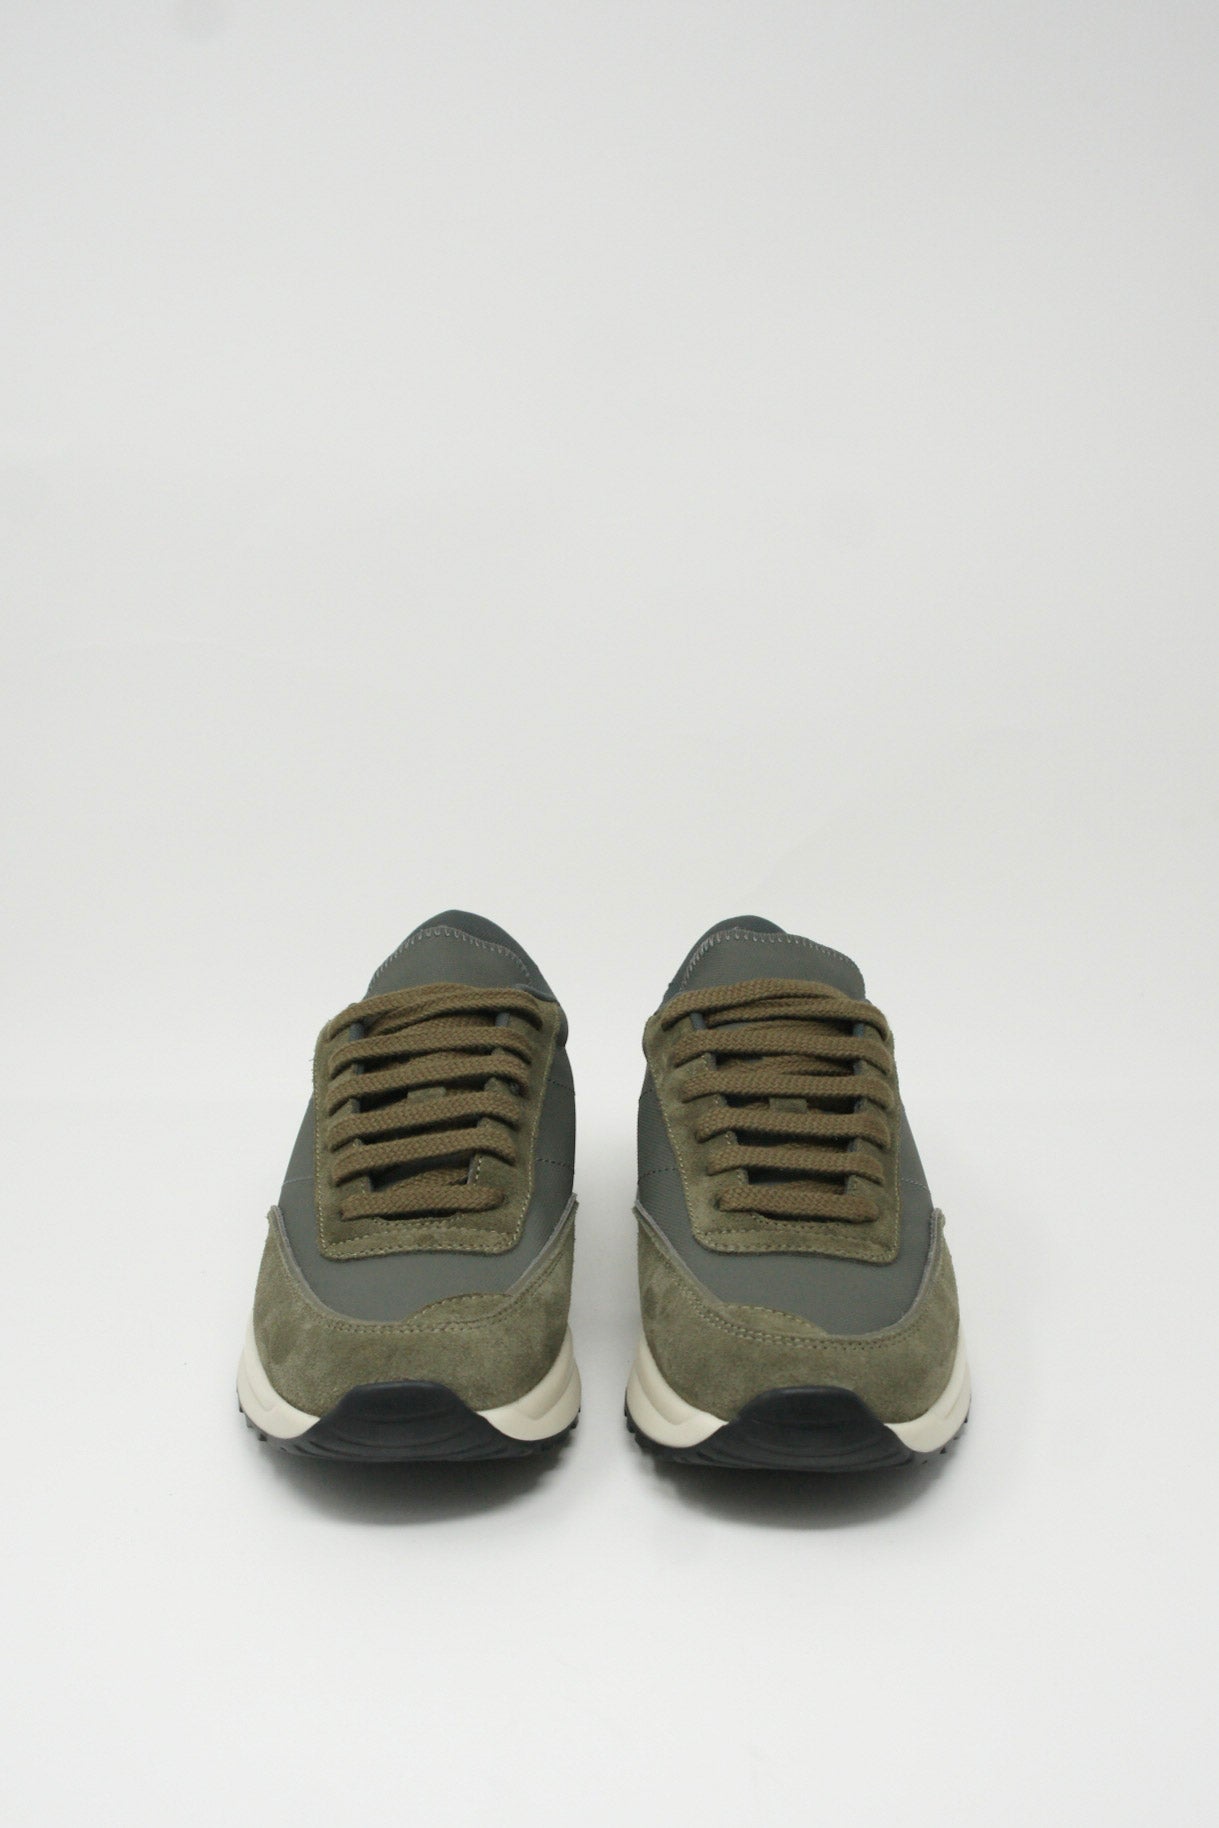 A pair of olive Track Technical Article Sneakers 6140 by Common Projects, with suede overlays and a lace-up closure on a white background.